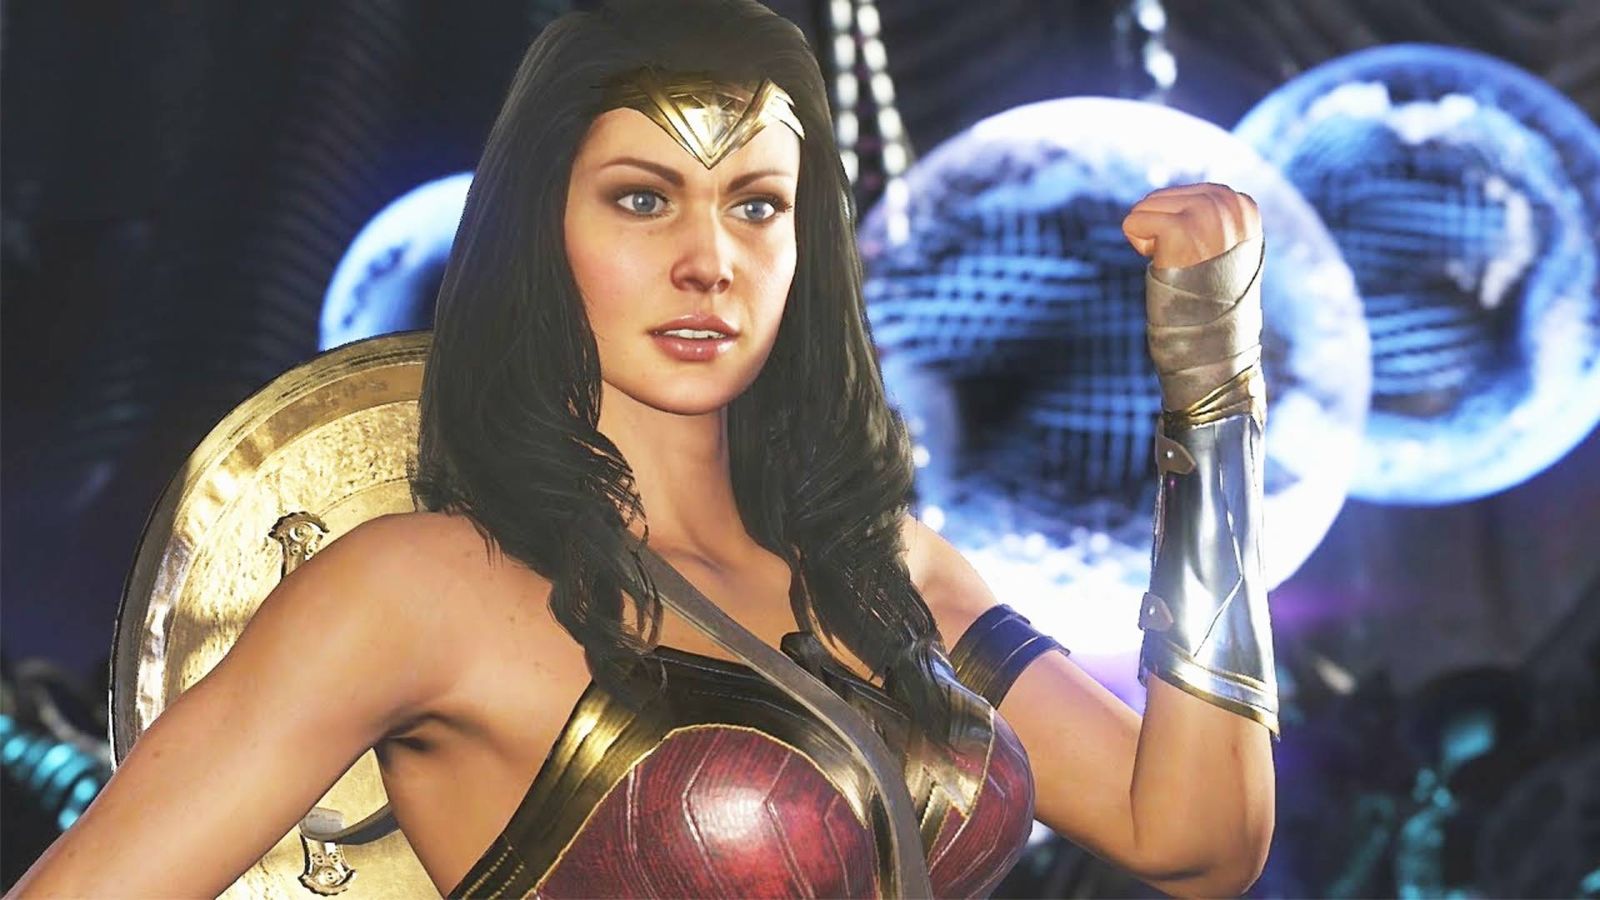 wonder woman game concept art appears for the first time